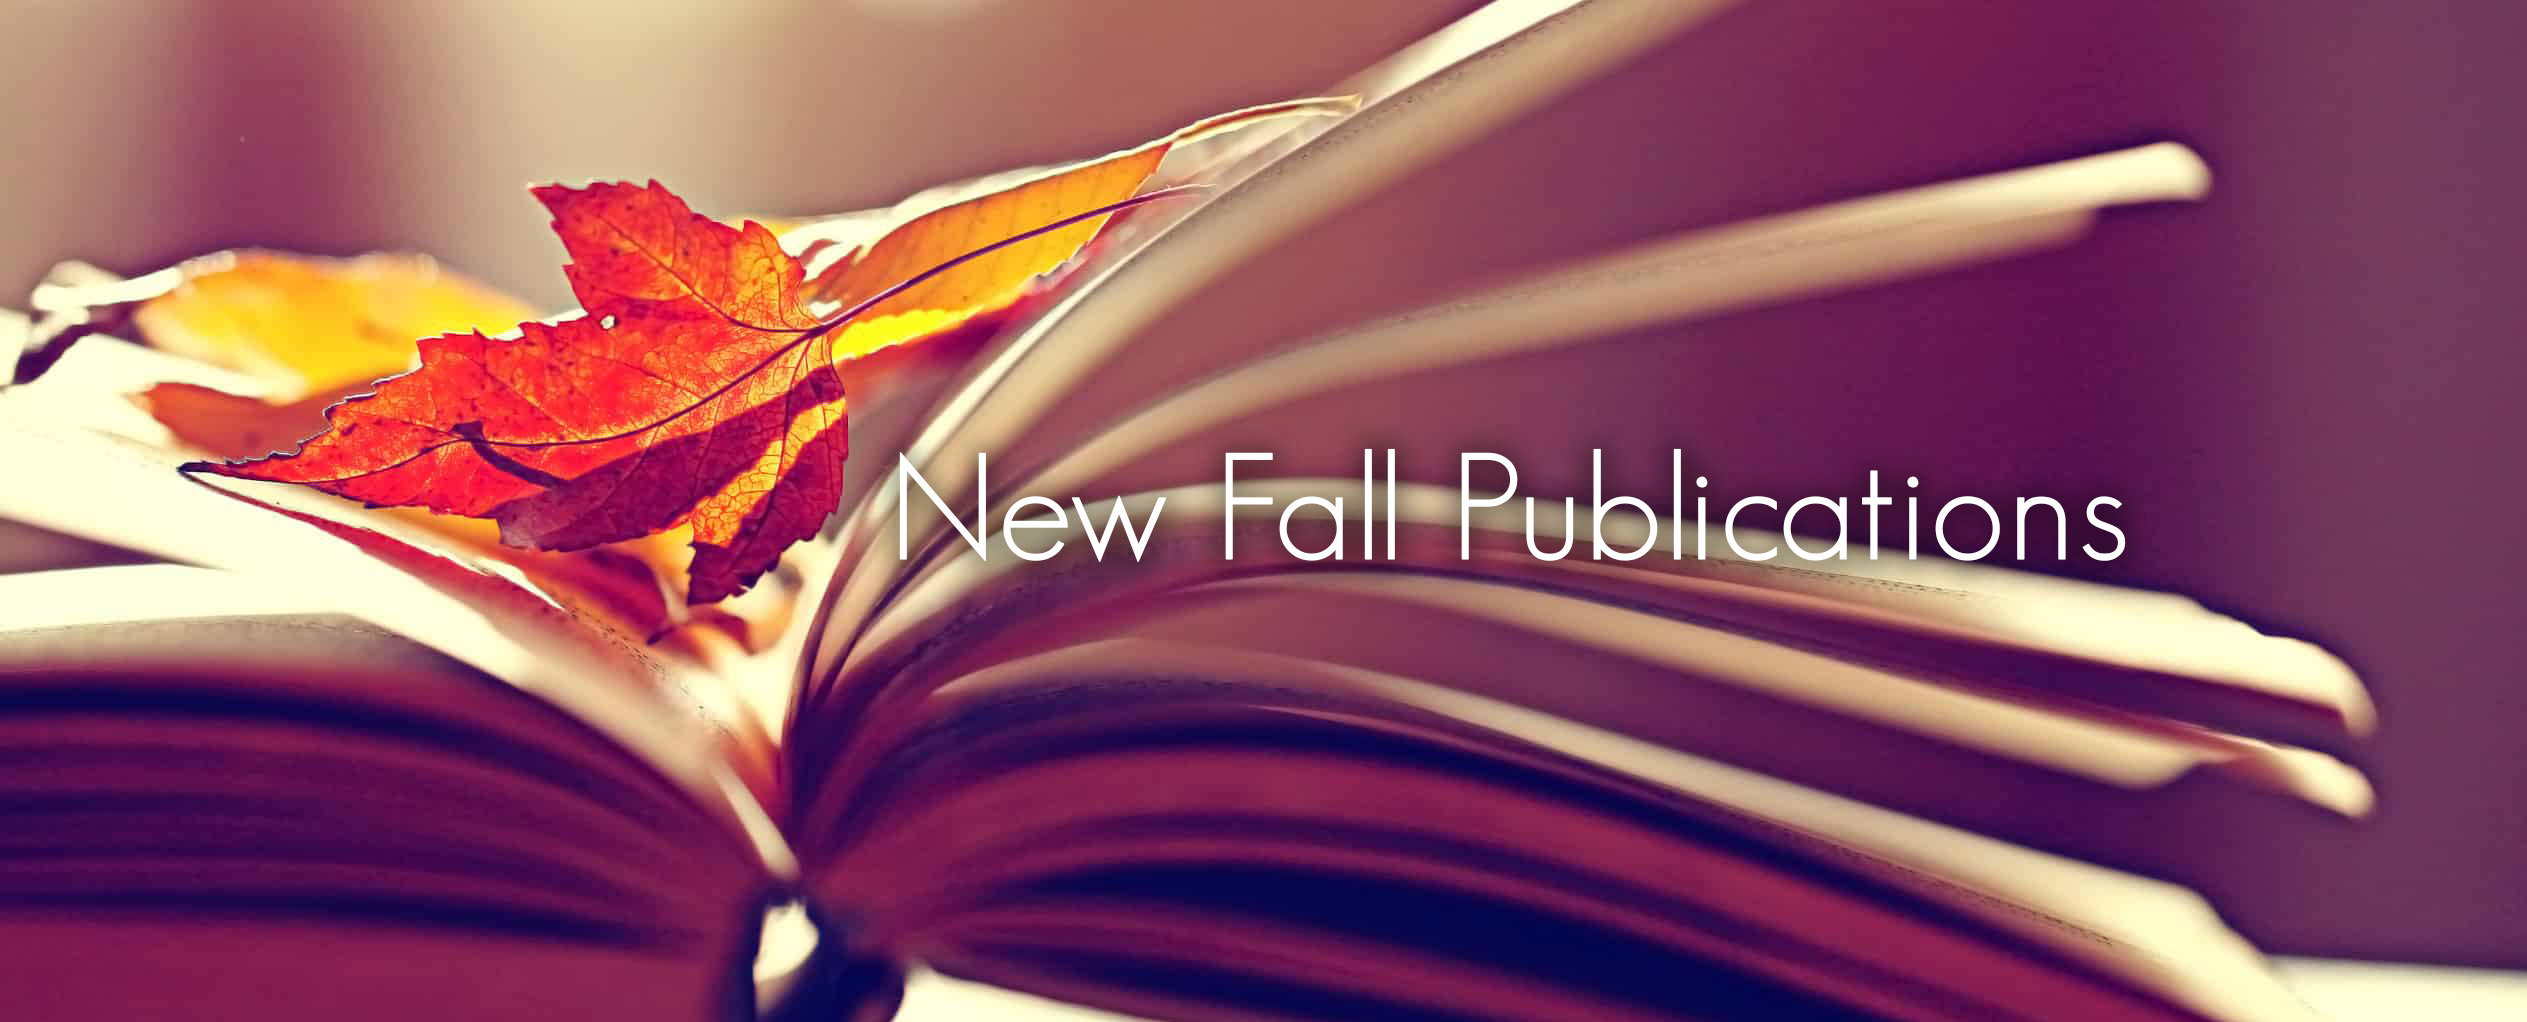 More New Fall Publications